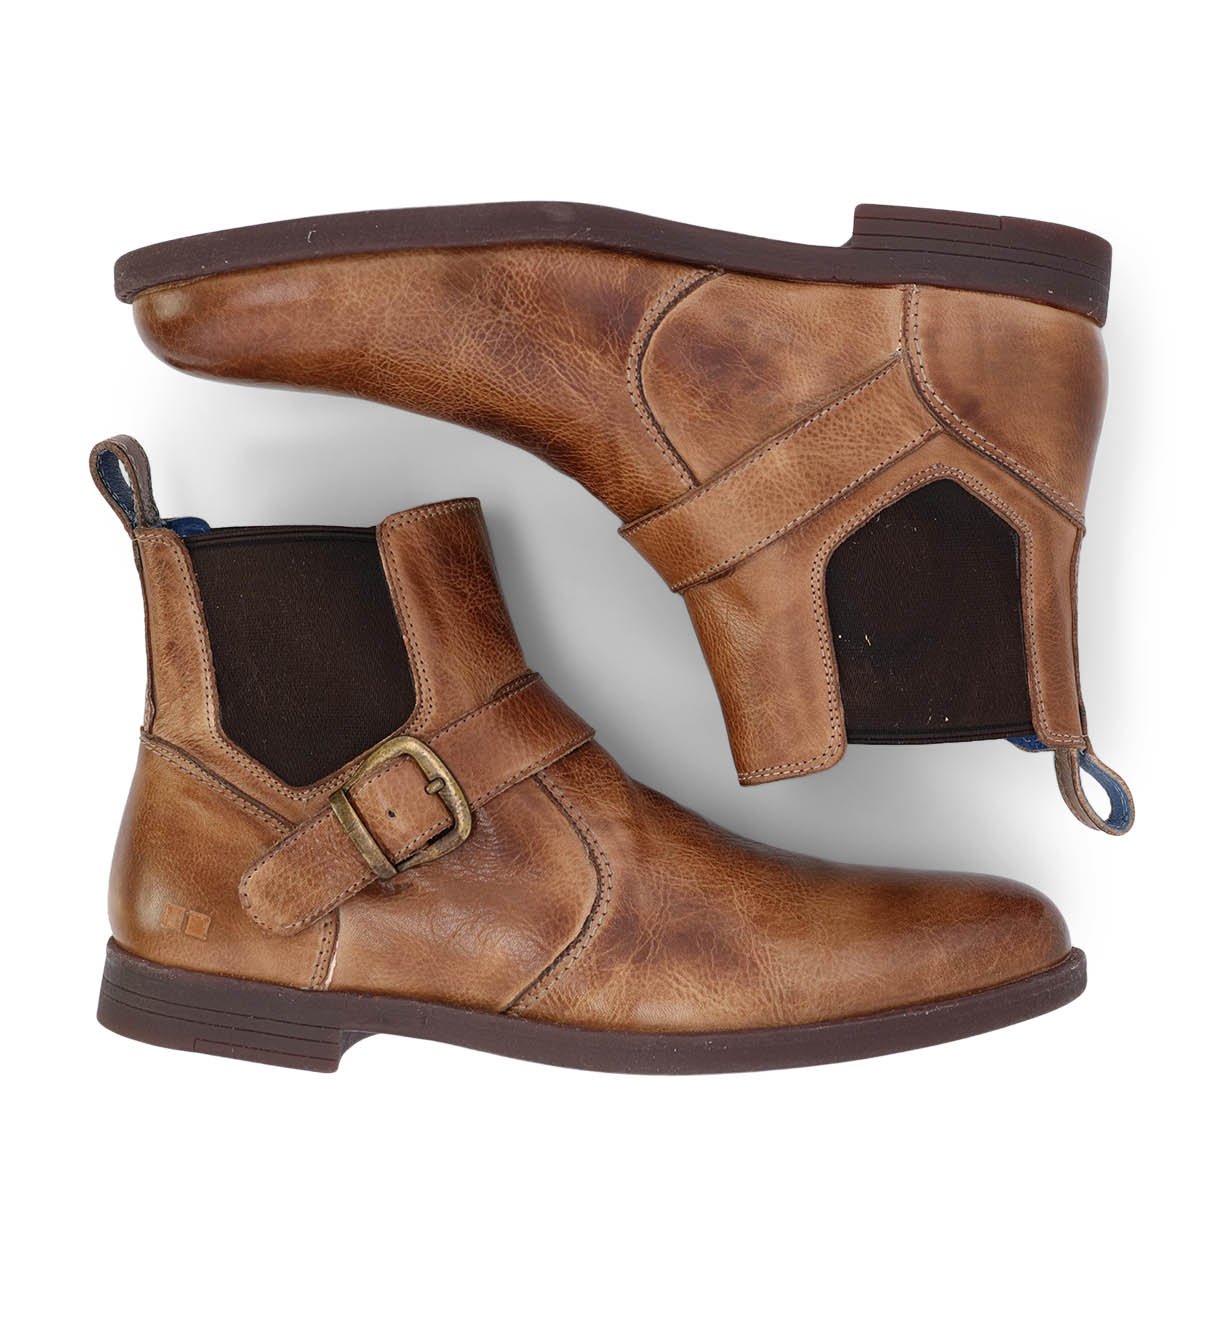 A pair of brown Michelangelo chelsea boots with buckles by Bed Stu.